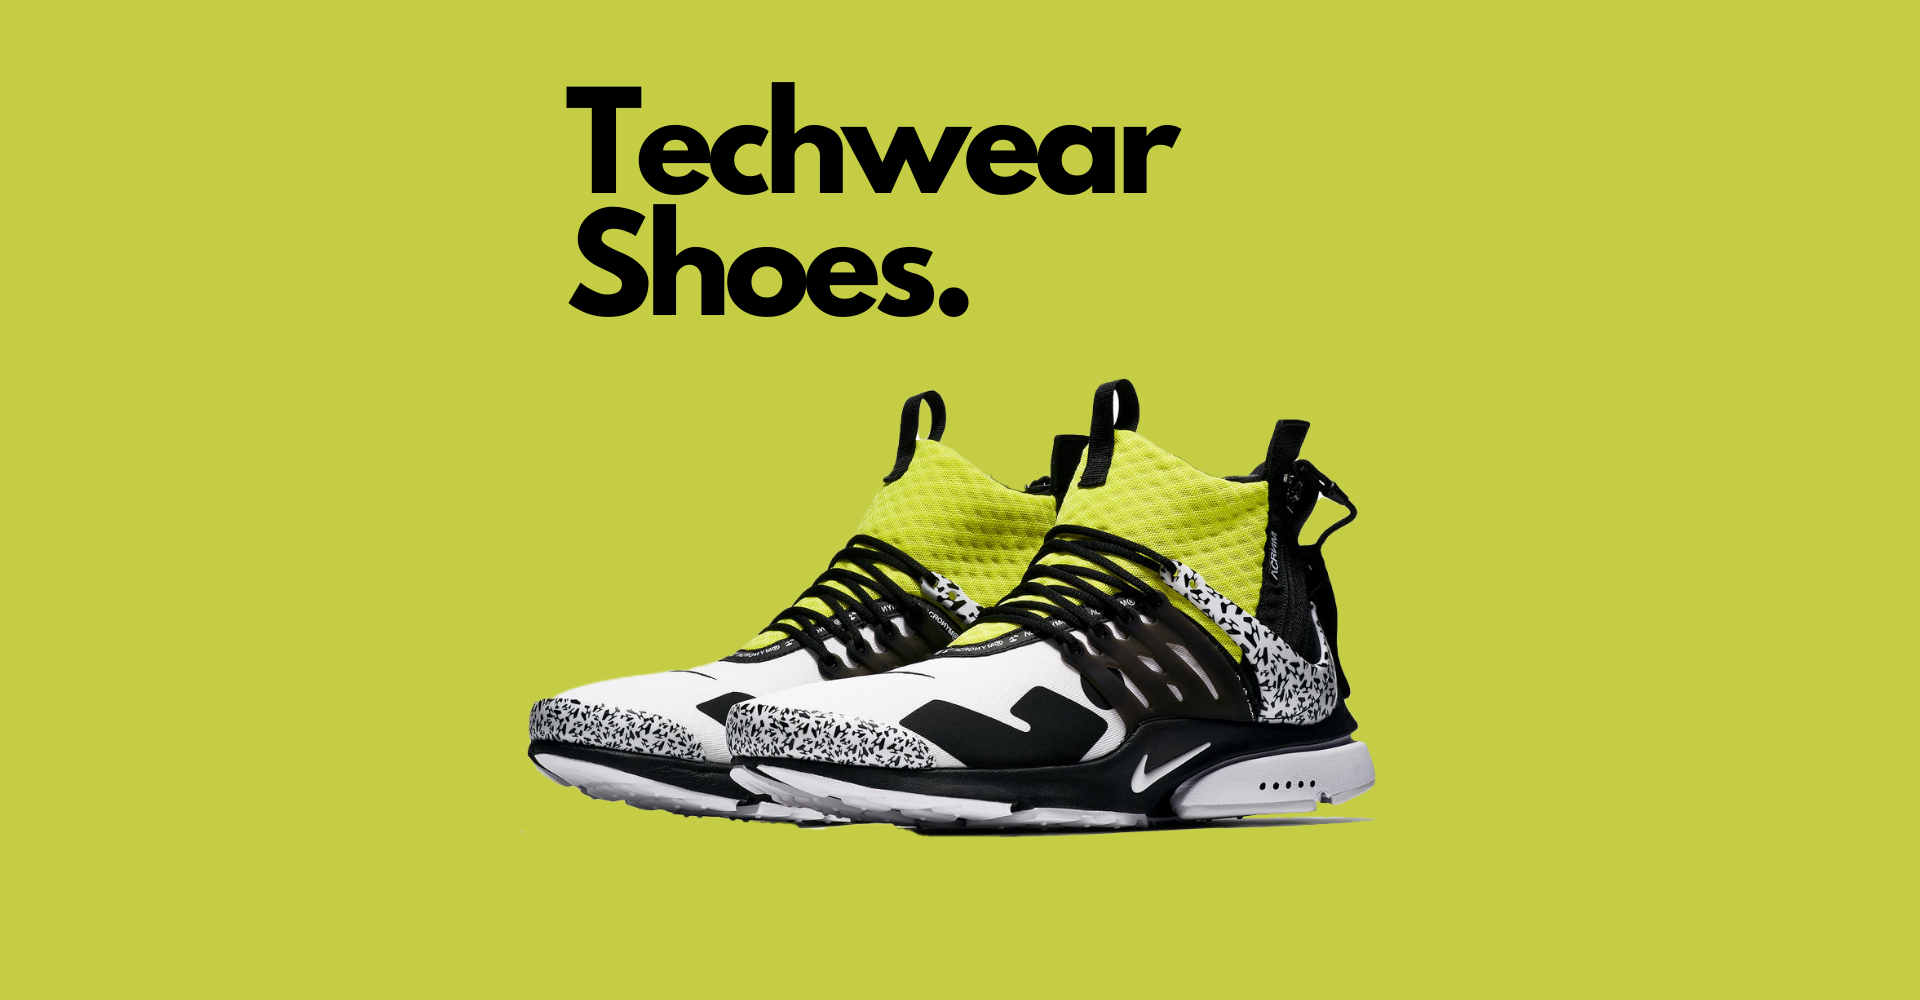 aprobar Lechuguilla Engaño Techwear Shoes – Guide For Newcomers – OnPointFresh